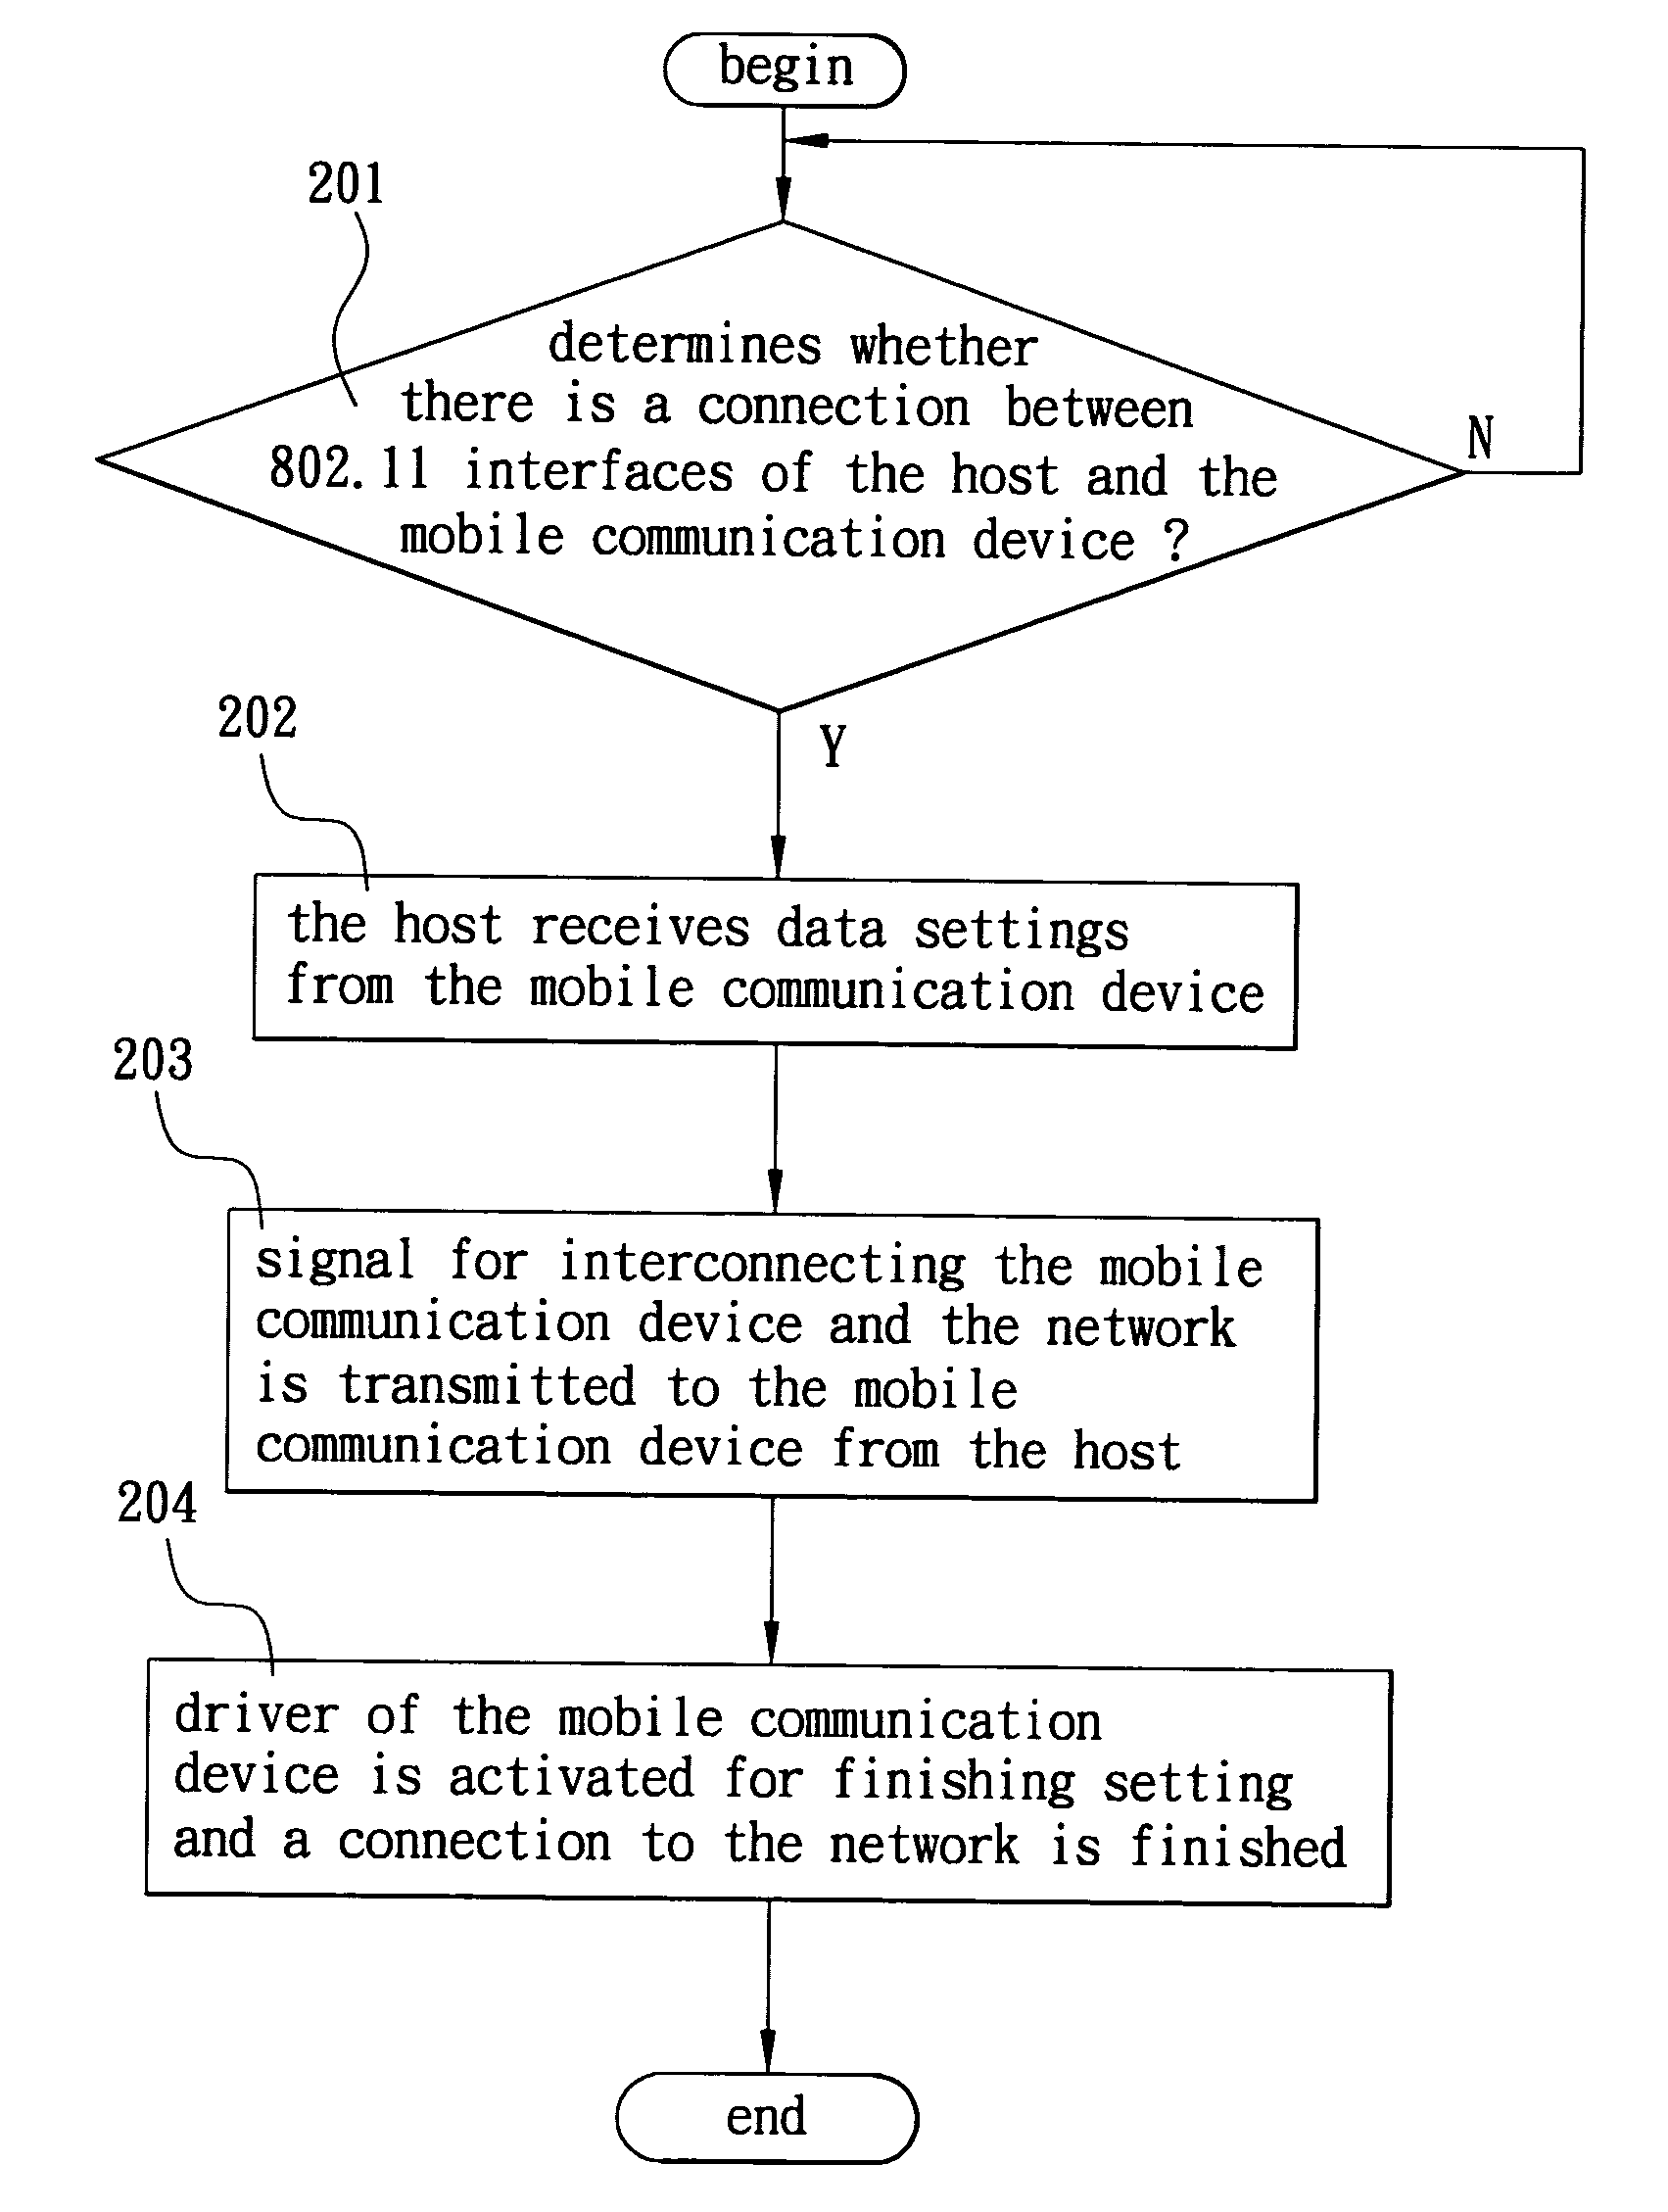 Method of wirelessly accessing network